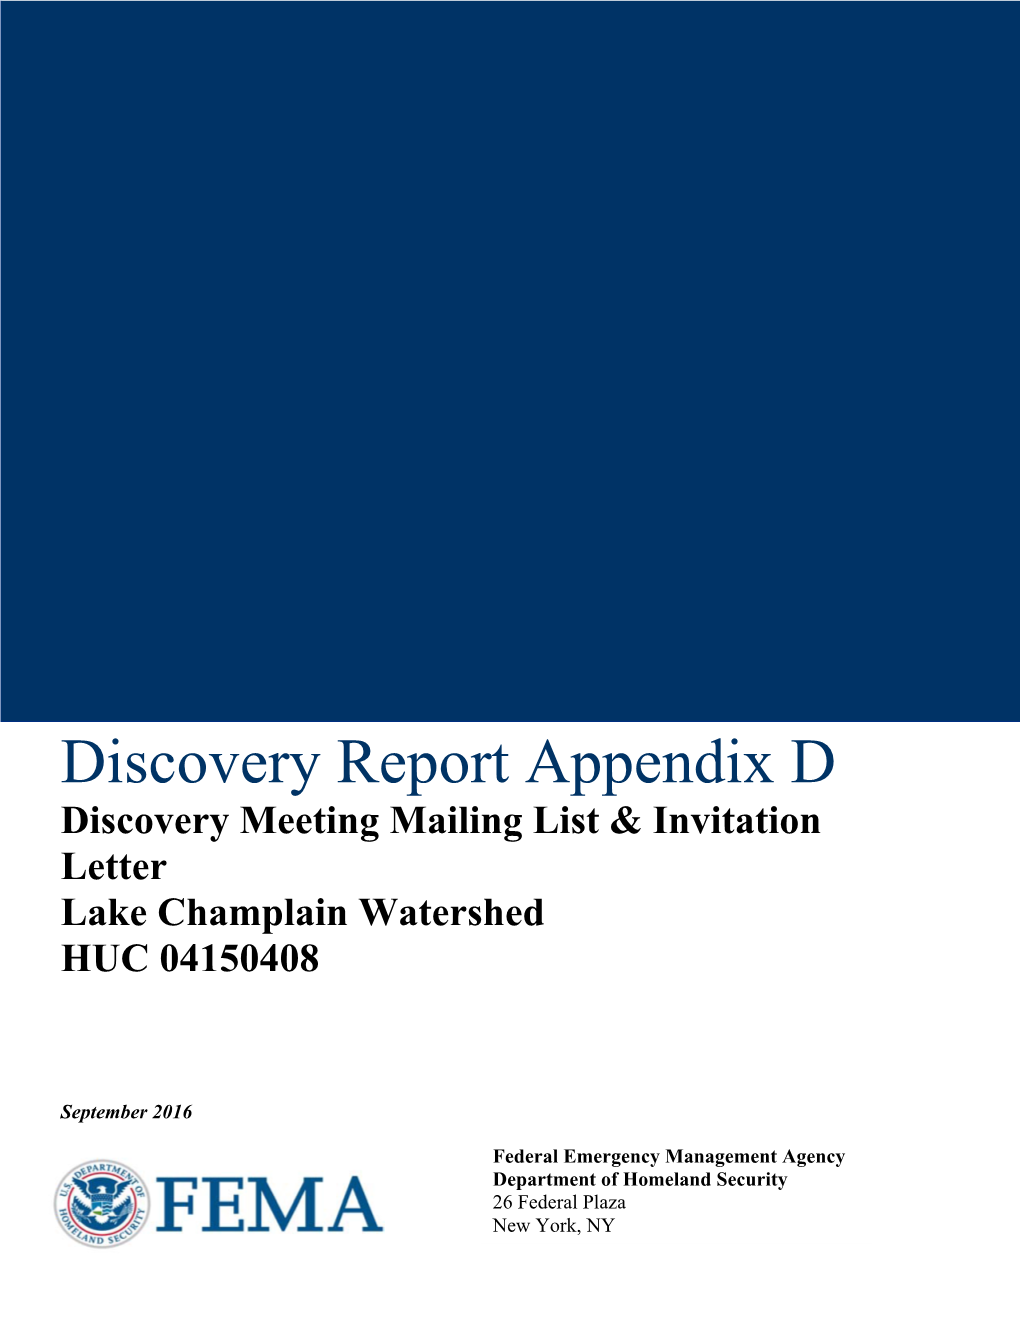 Discovery Report Appendix D Discovery Meeting Mailing List & Invitation Letter Lake Champlain Watershed HUC 04150408